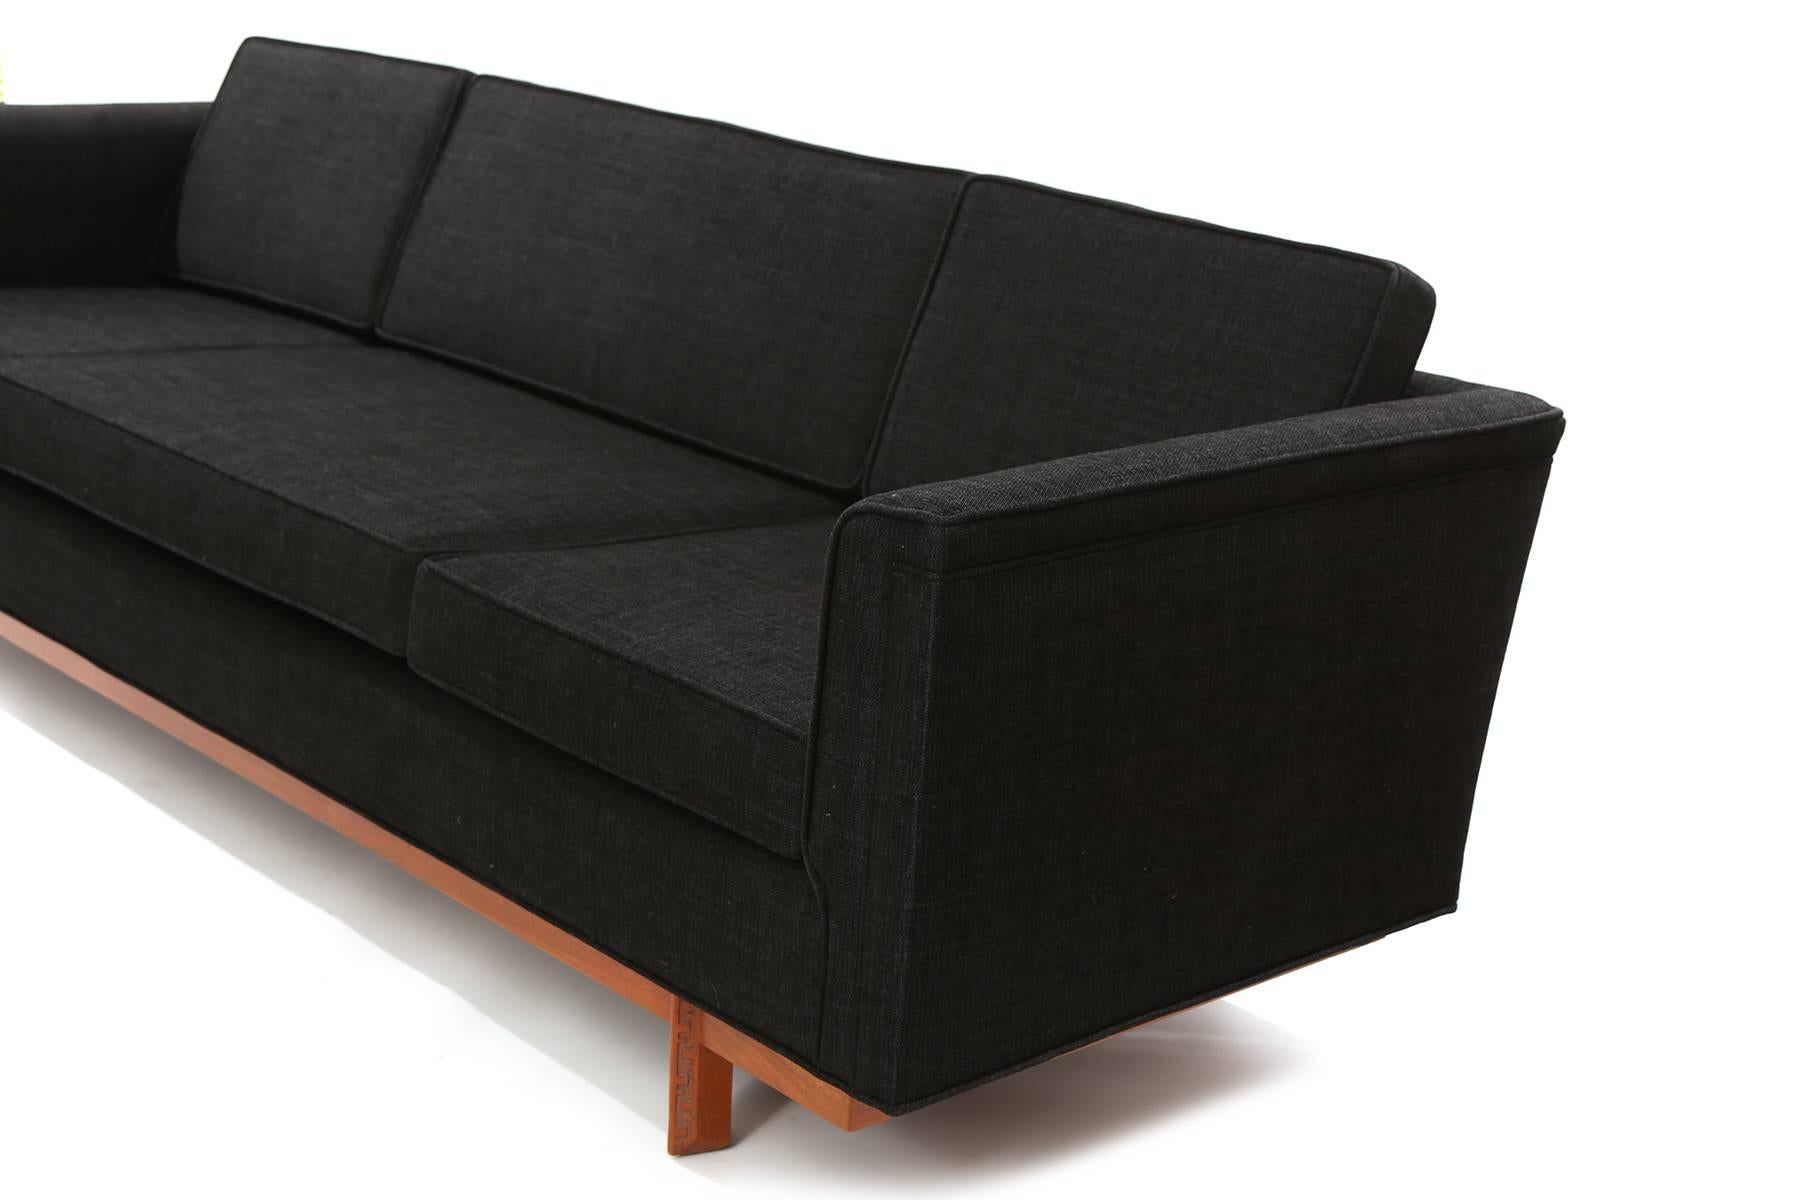 Frank Lloyd Wright for Heritage Henredon sofa circa early 1960's. This example has a solid mahogany base with the Taliesin detail carved into the legs. It has been newly upholstered in a striking black textile with linen colored accents. Retains its